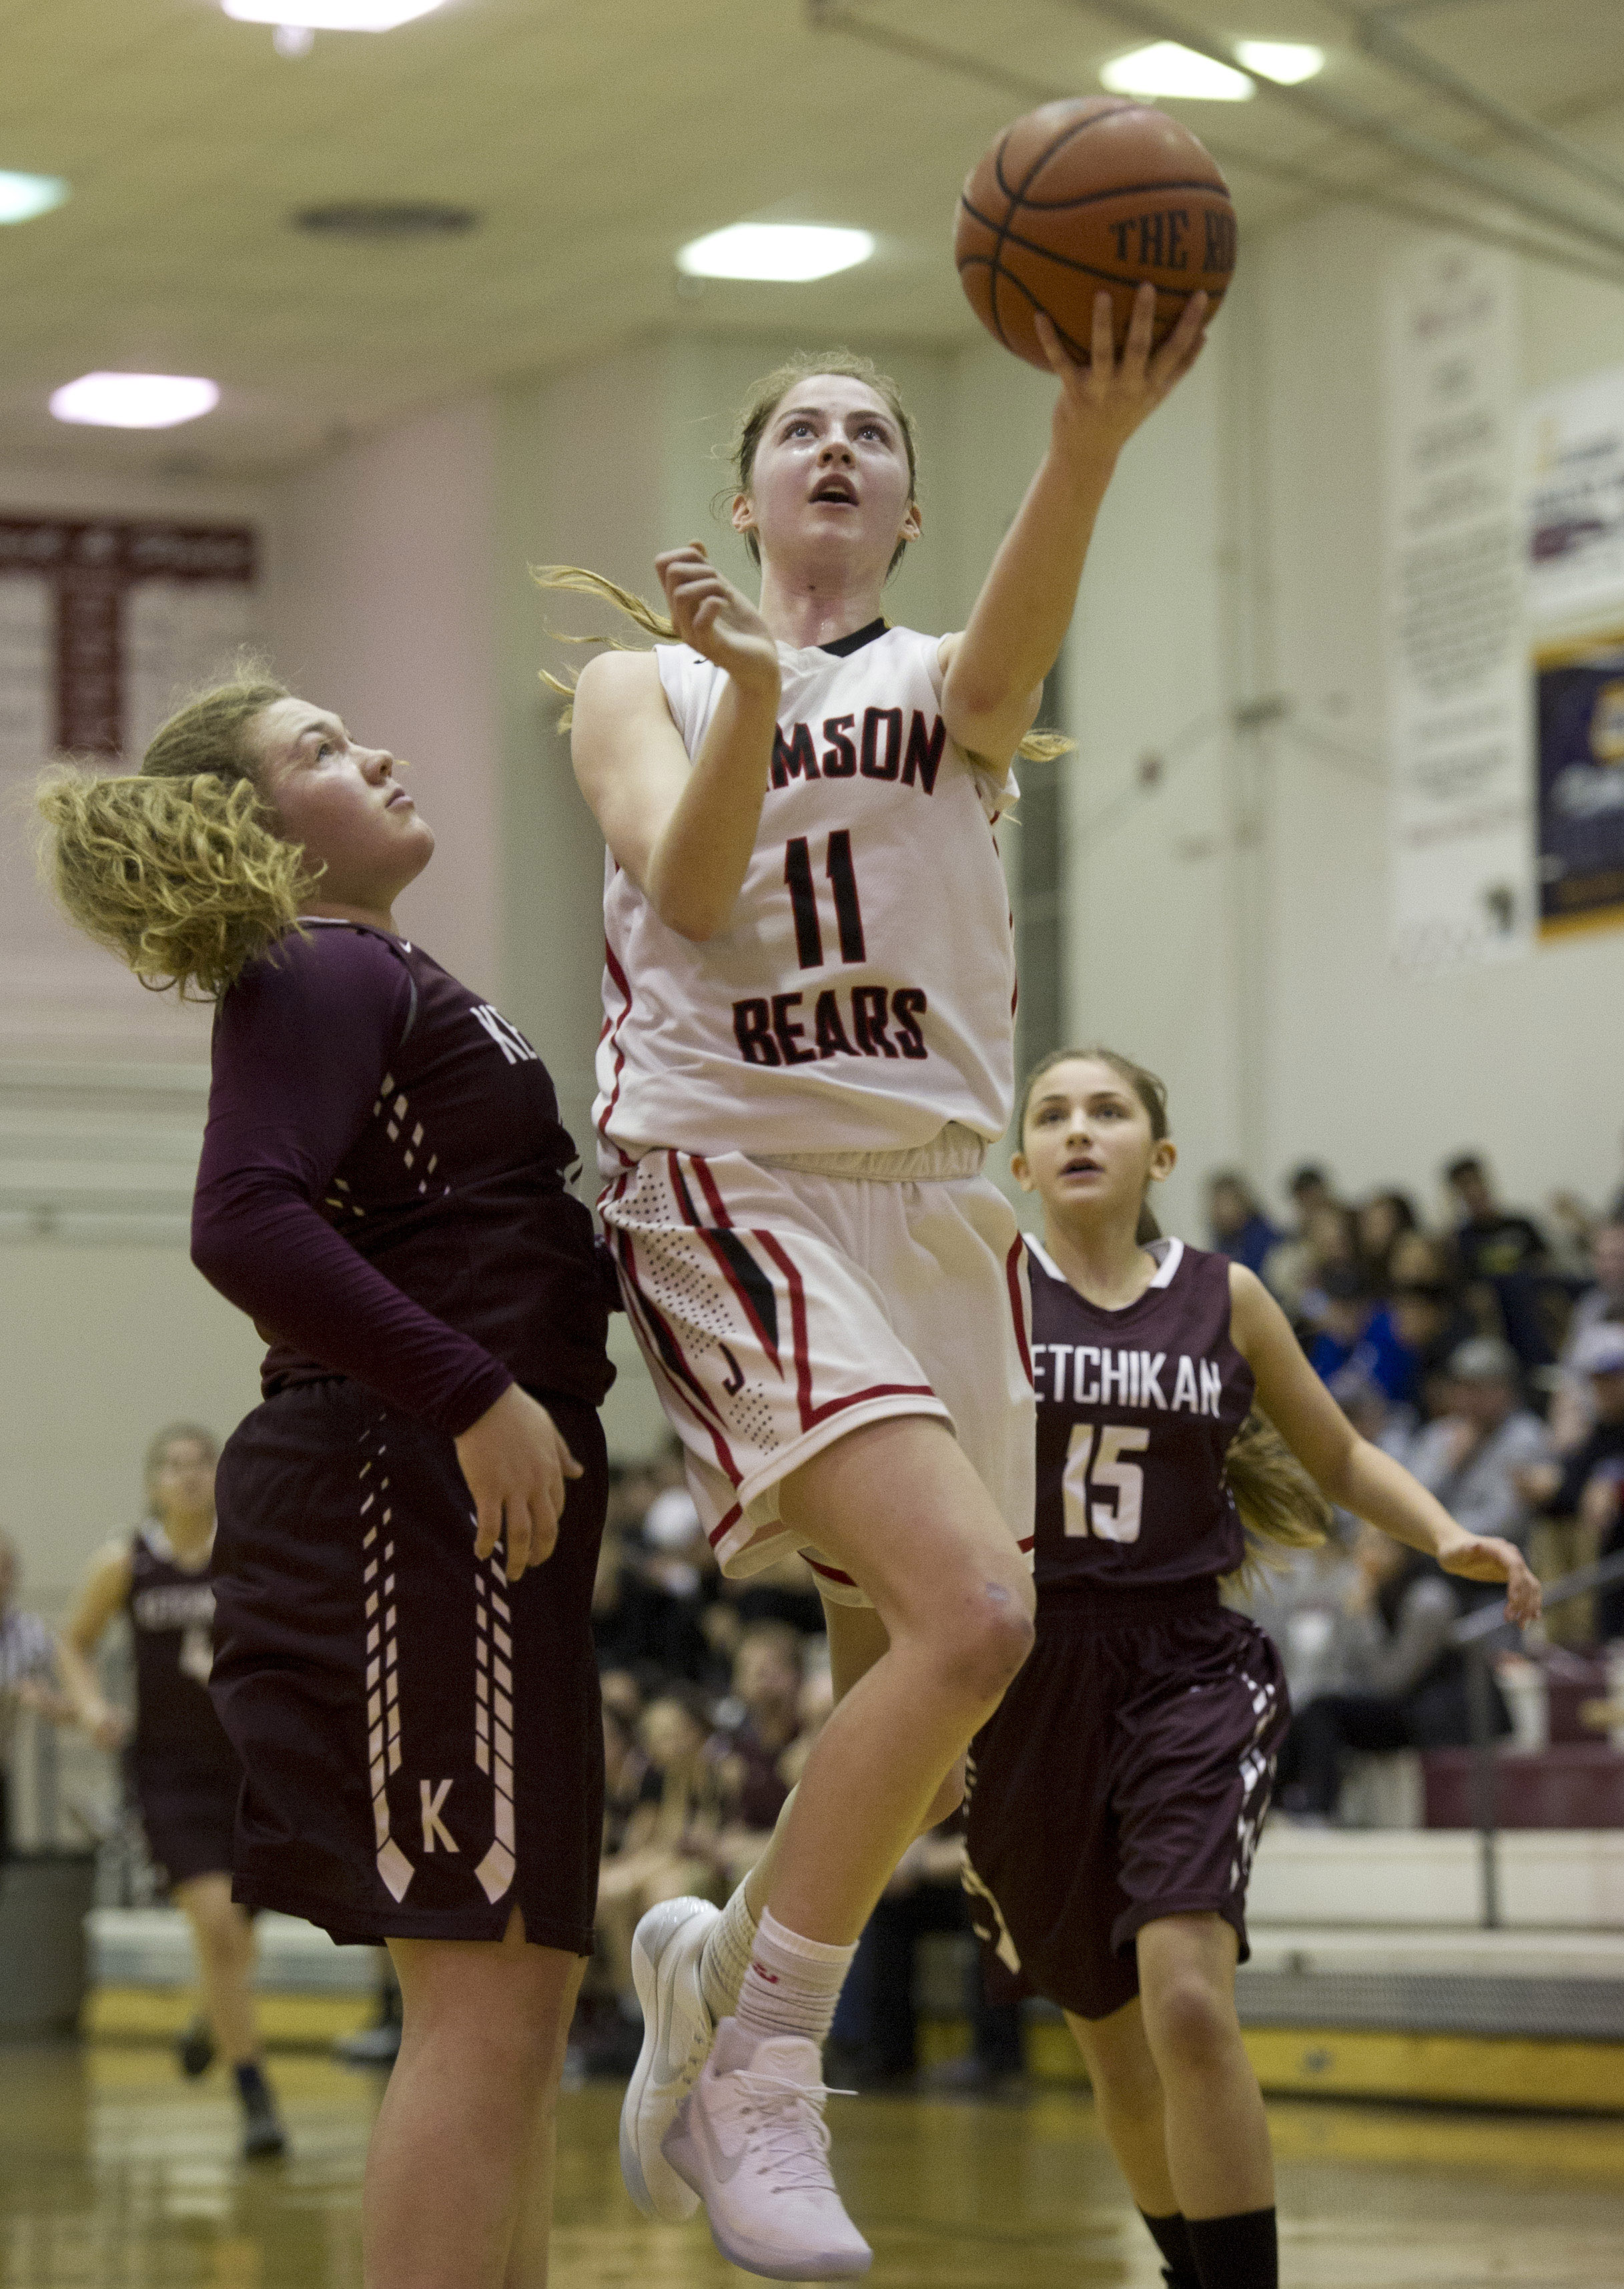 Kendyl Carson drives to the basket during a game against Ketchikan High School. Carson's 26 points on Saturday were her highest total to date.